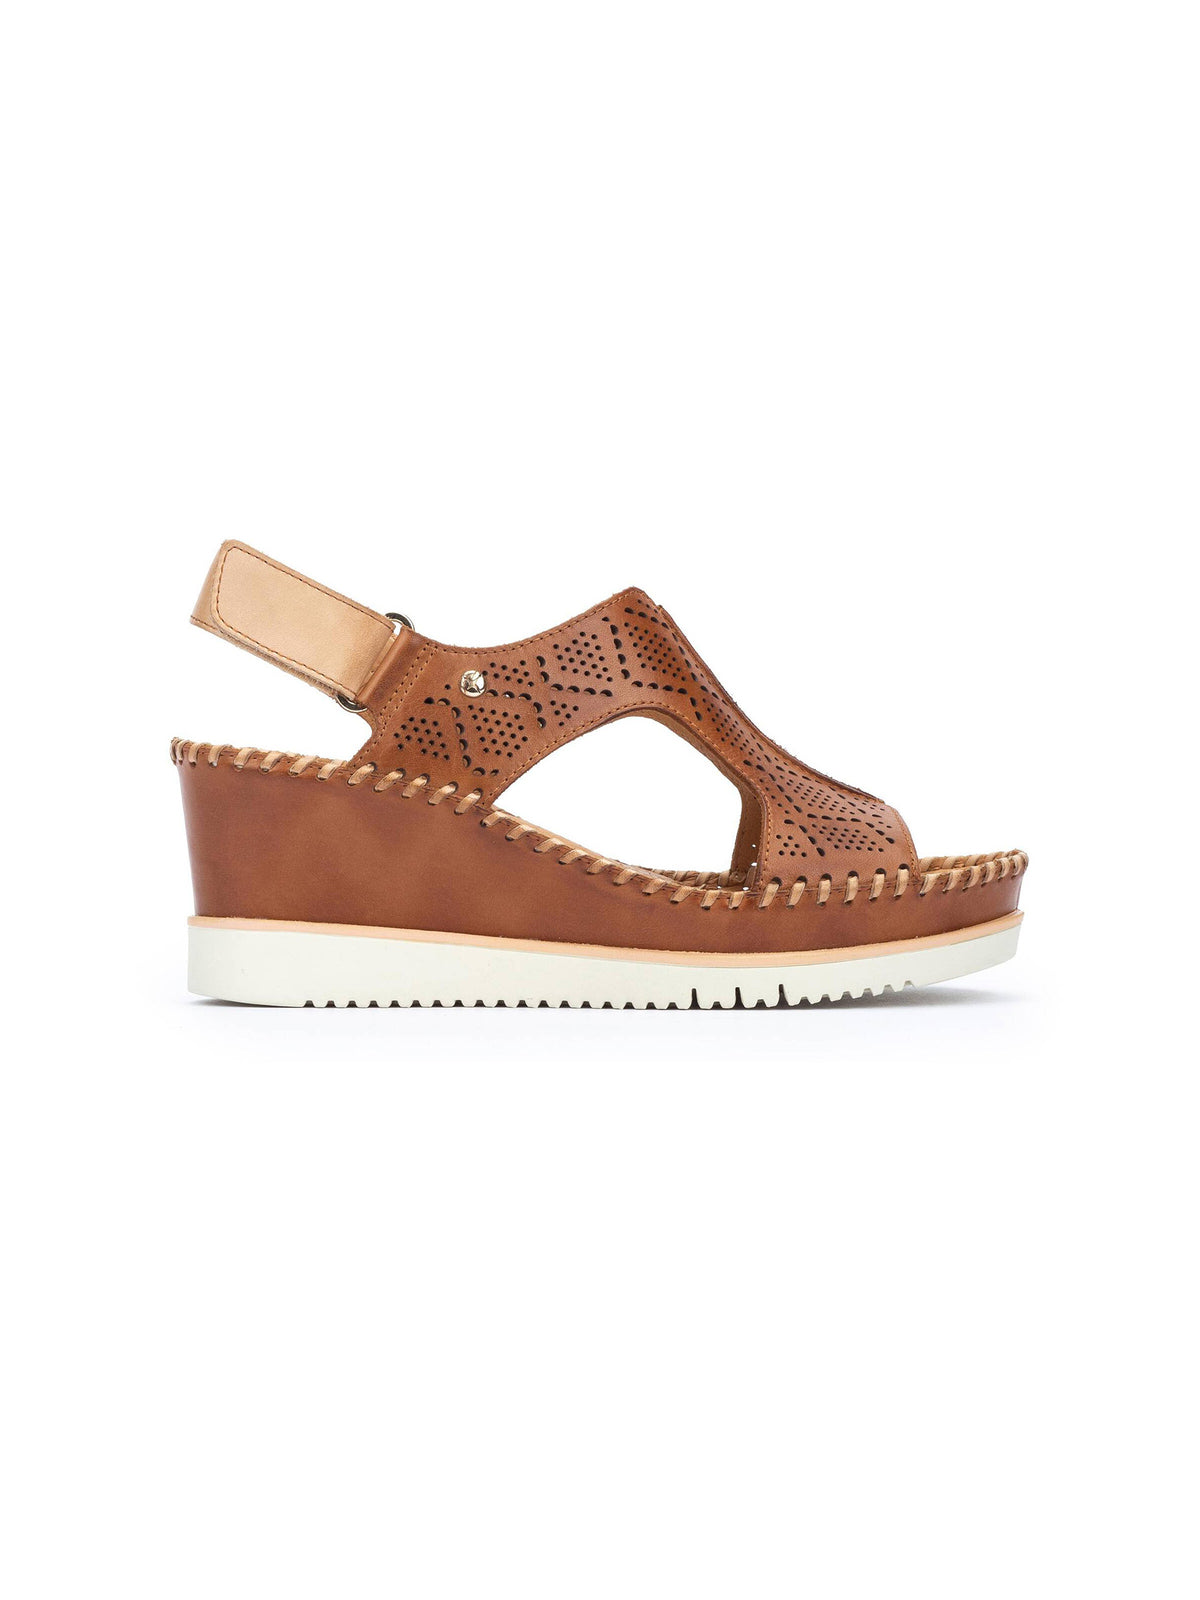 pikolinos aguadulce wedge sandals in brandy-side single view